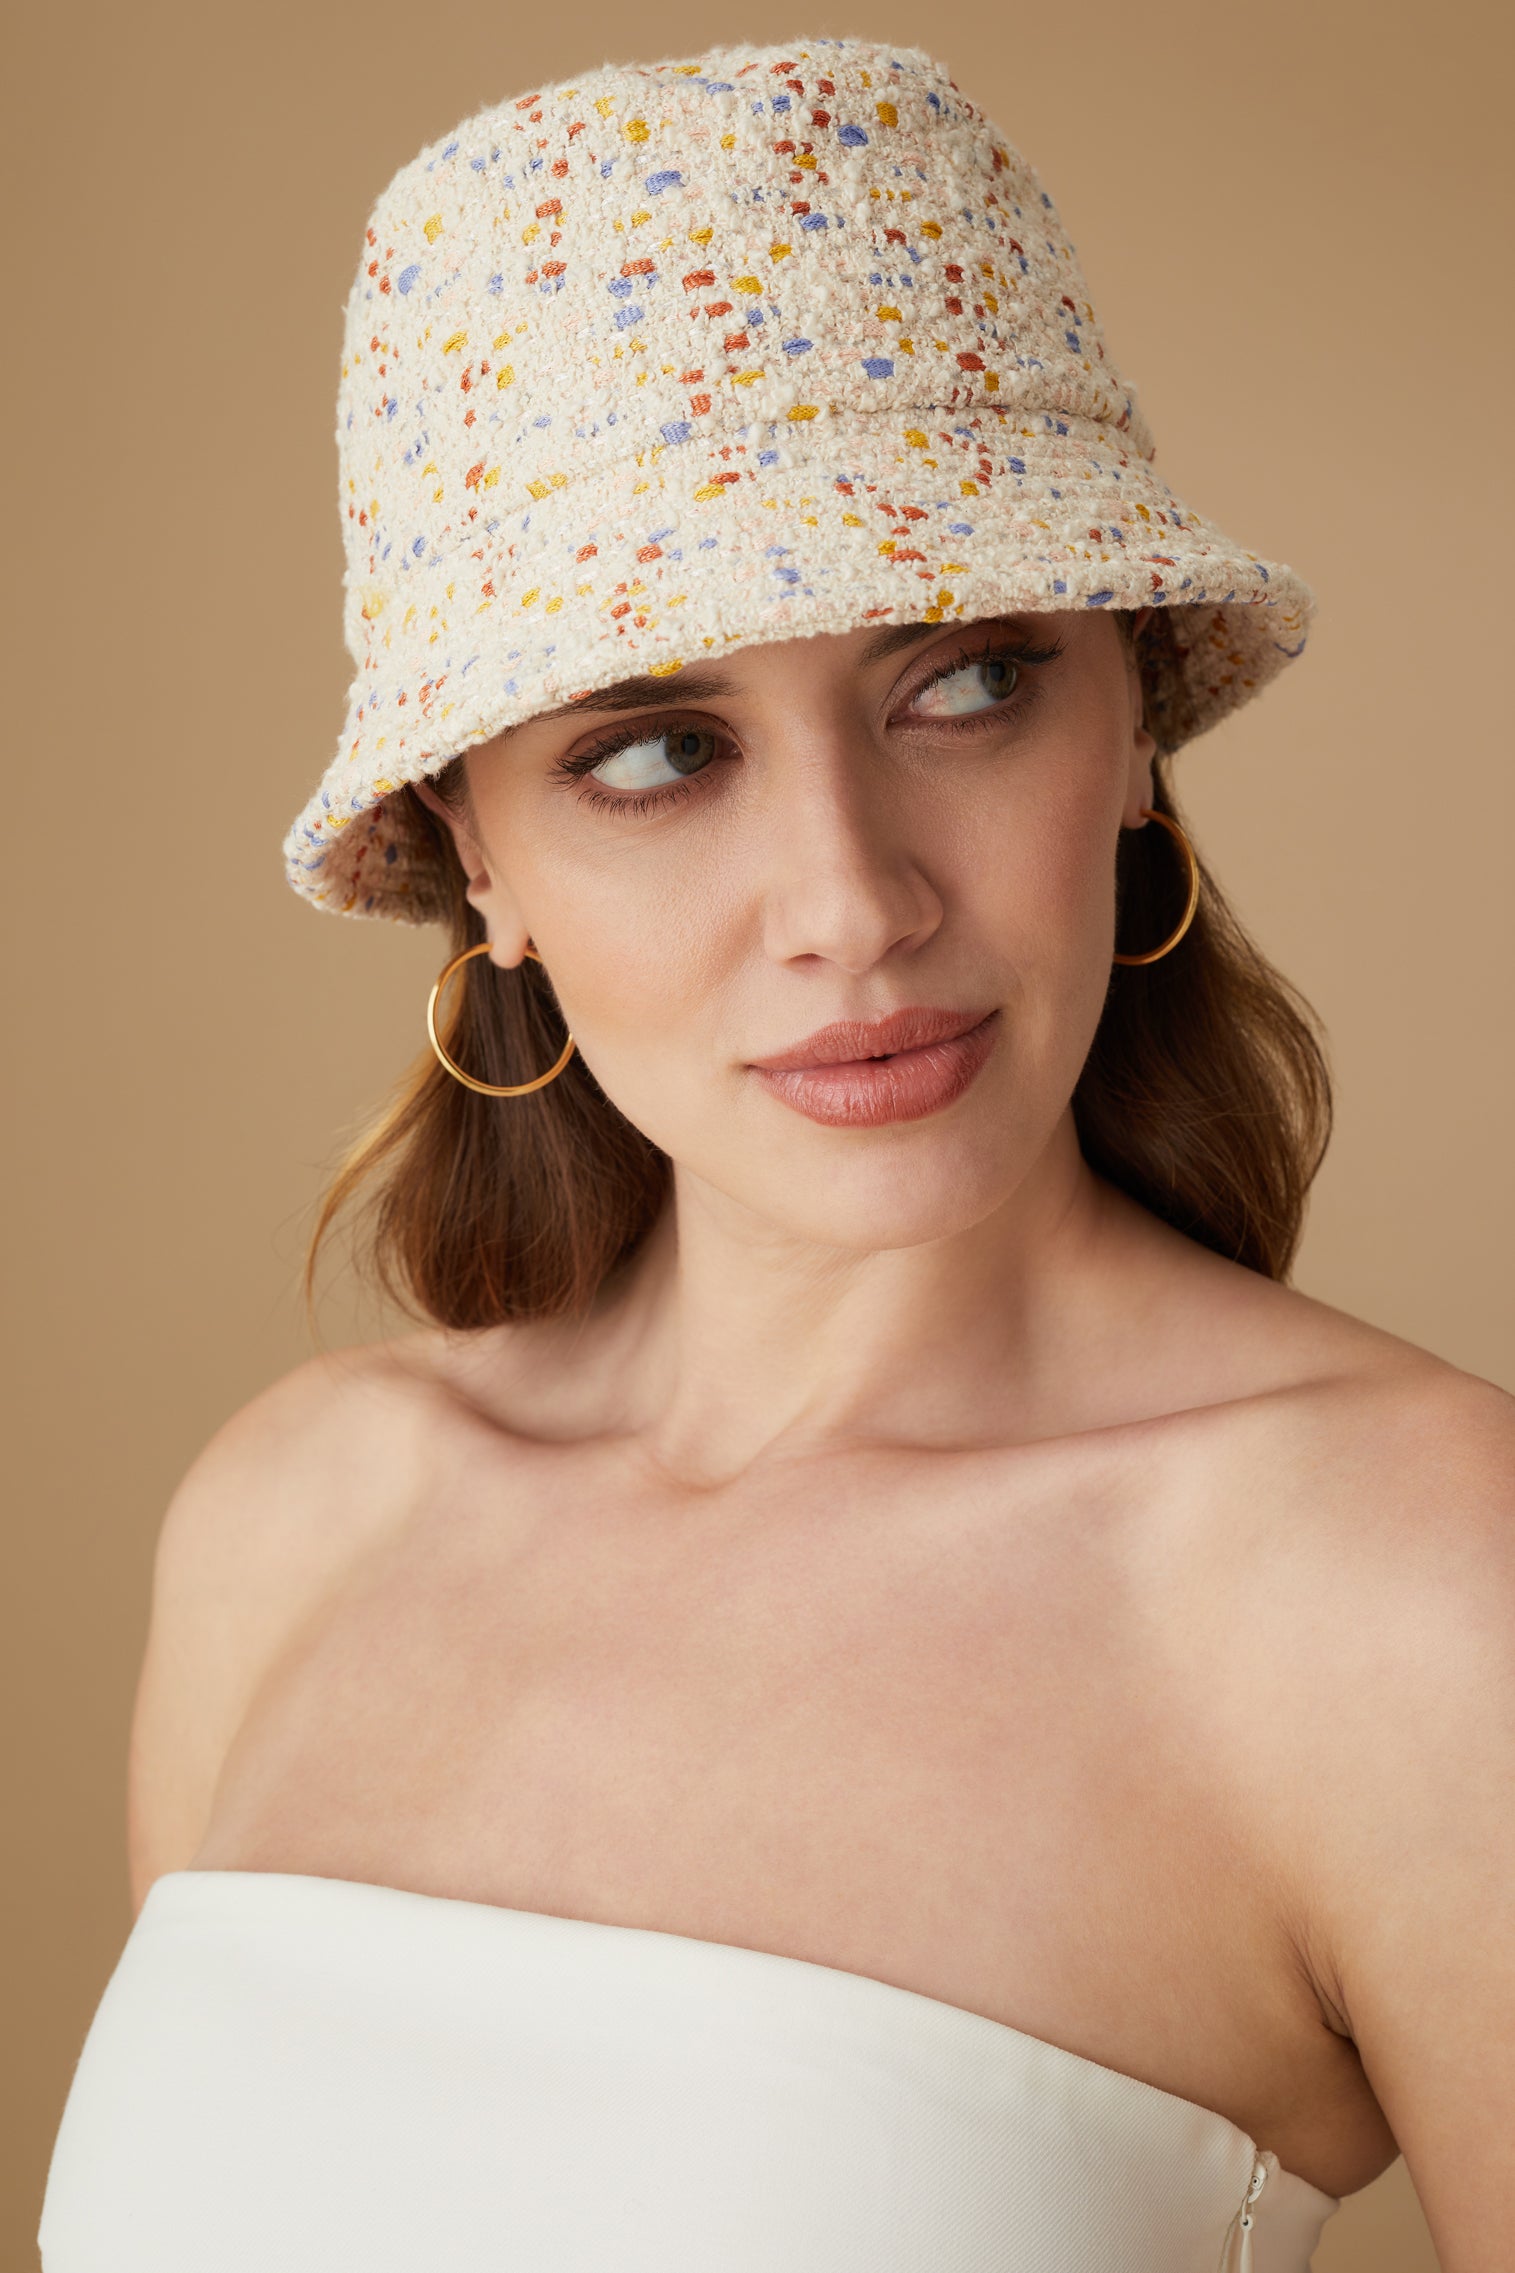 Rye Speckled Bucket Hat - Packable Hats for Travel - Lock & Co. Hatters London UK